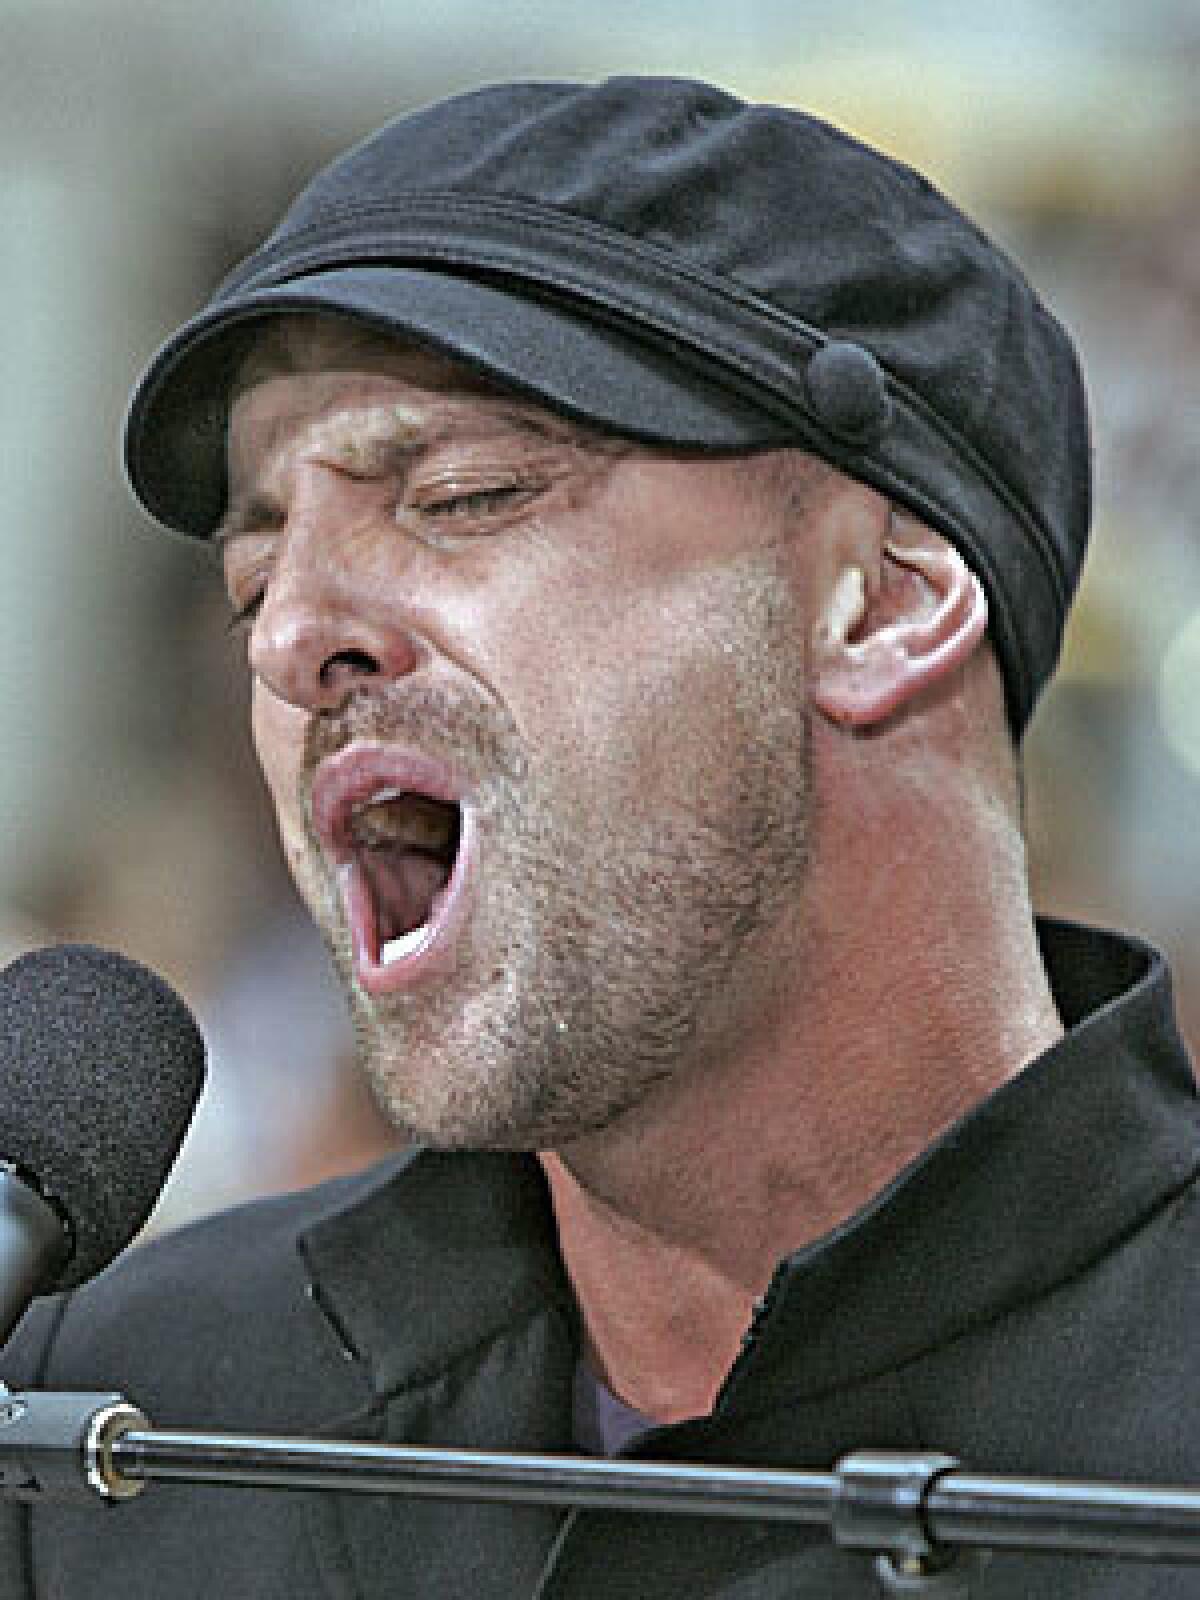 Daniel Powter, who sang his No. 1 hit, "Bad Day," live on the penultimate show of "American Idol" in 2006, has listed his Brentwood-area house at $2,295,000.